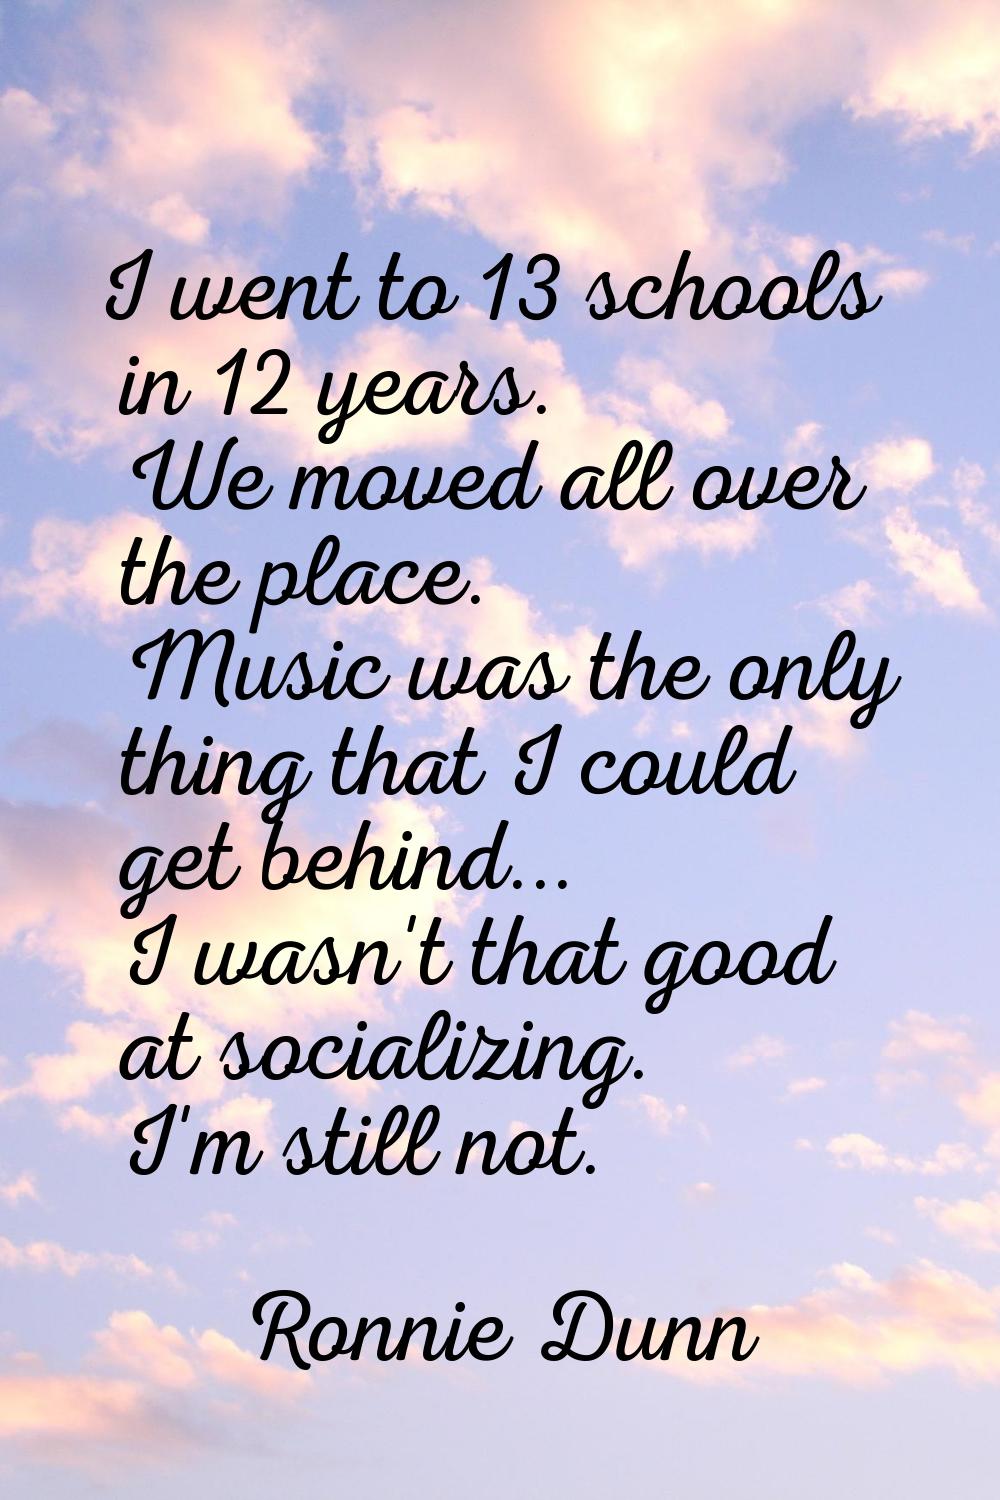 I went to 13 schools in 12 years. We moved all over the place. Music was the only thing that I coul